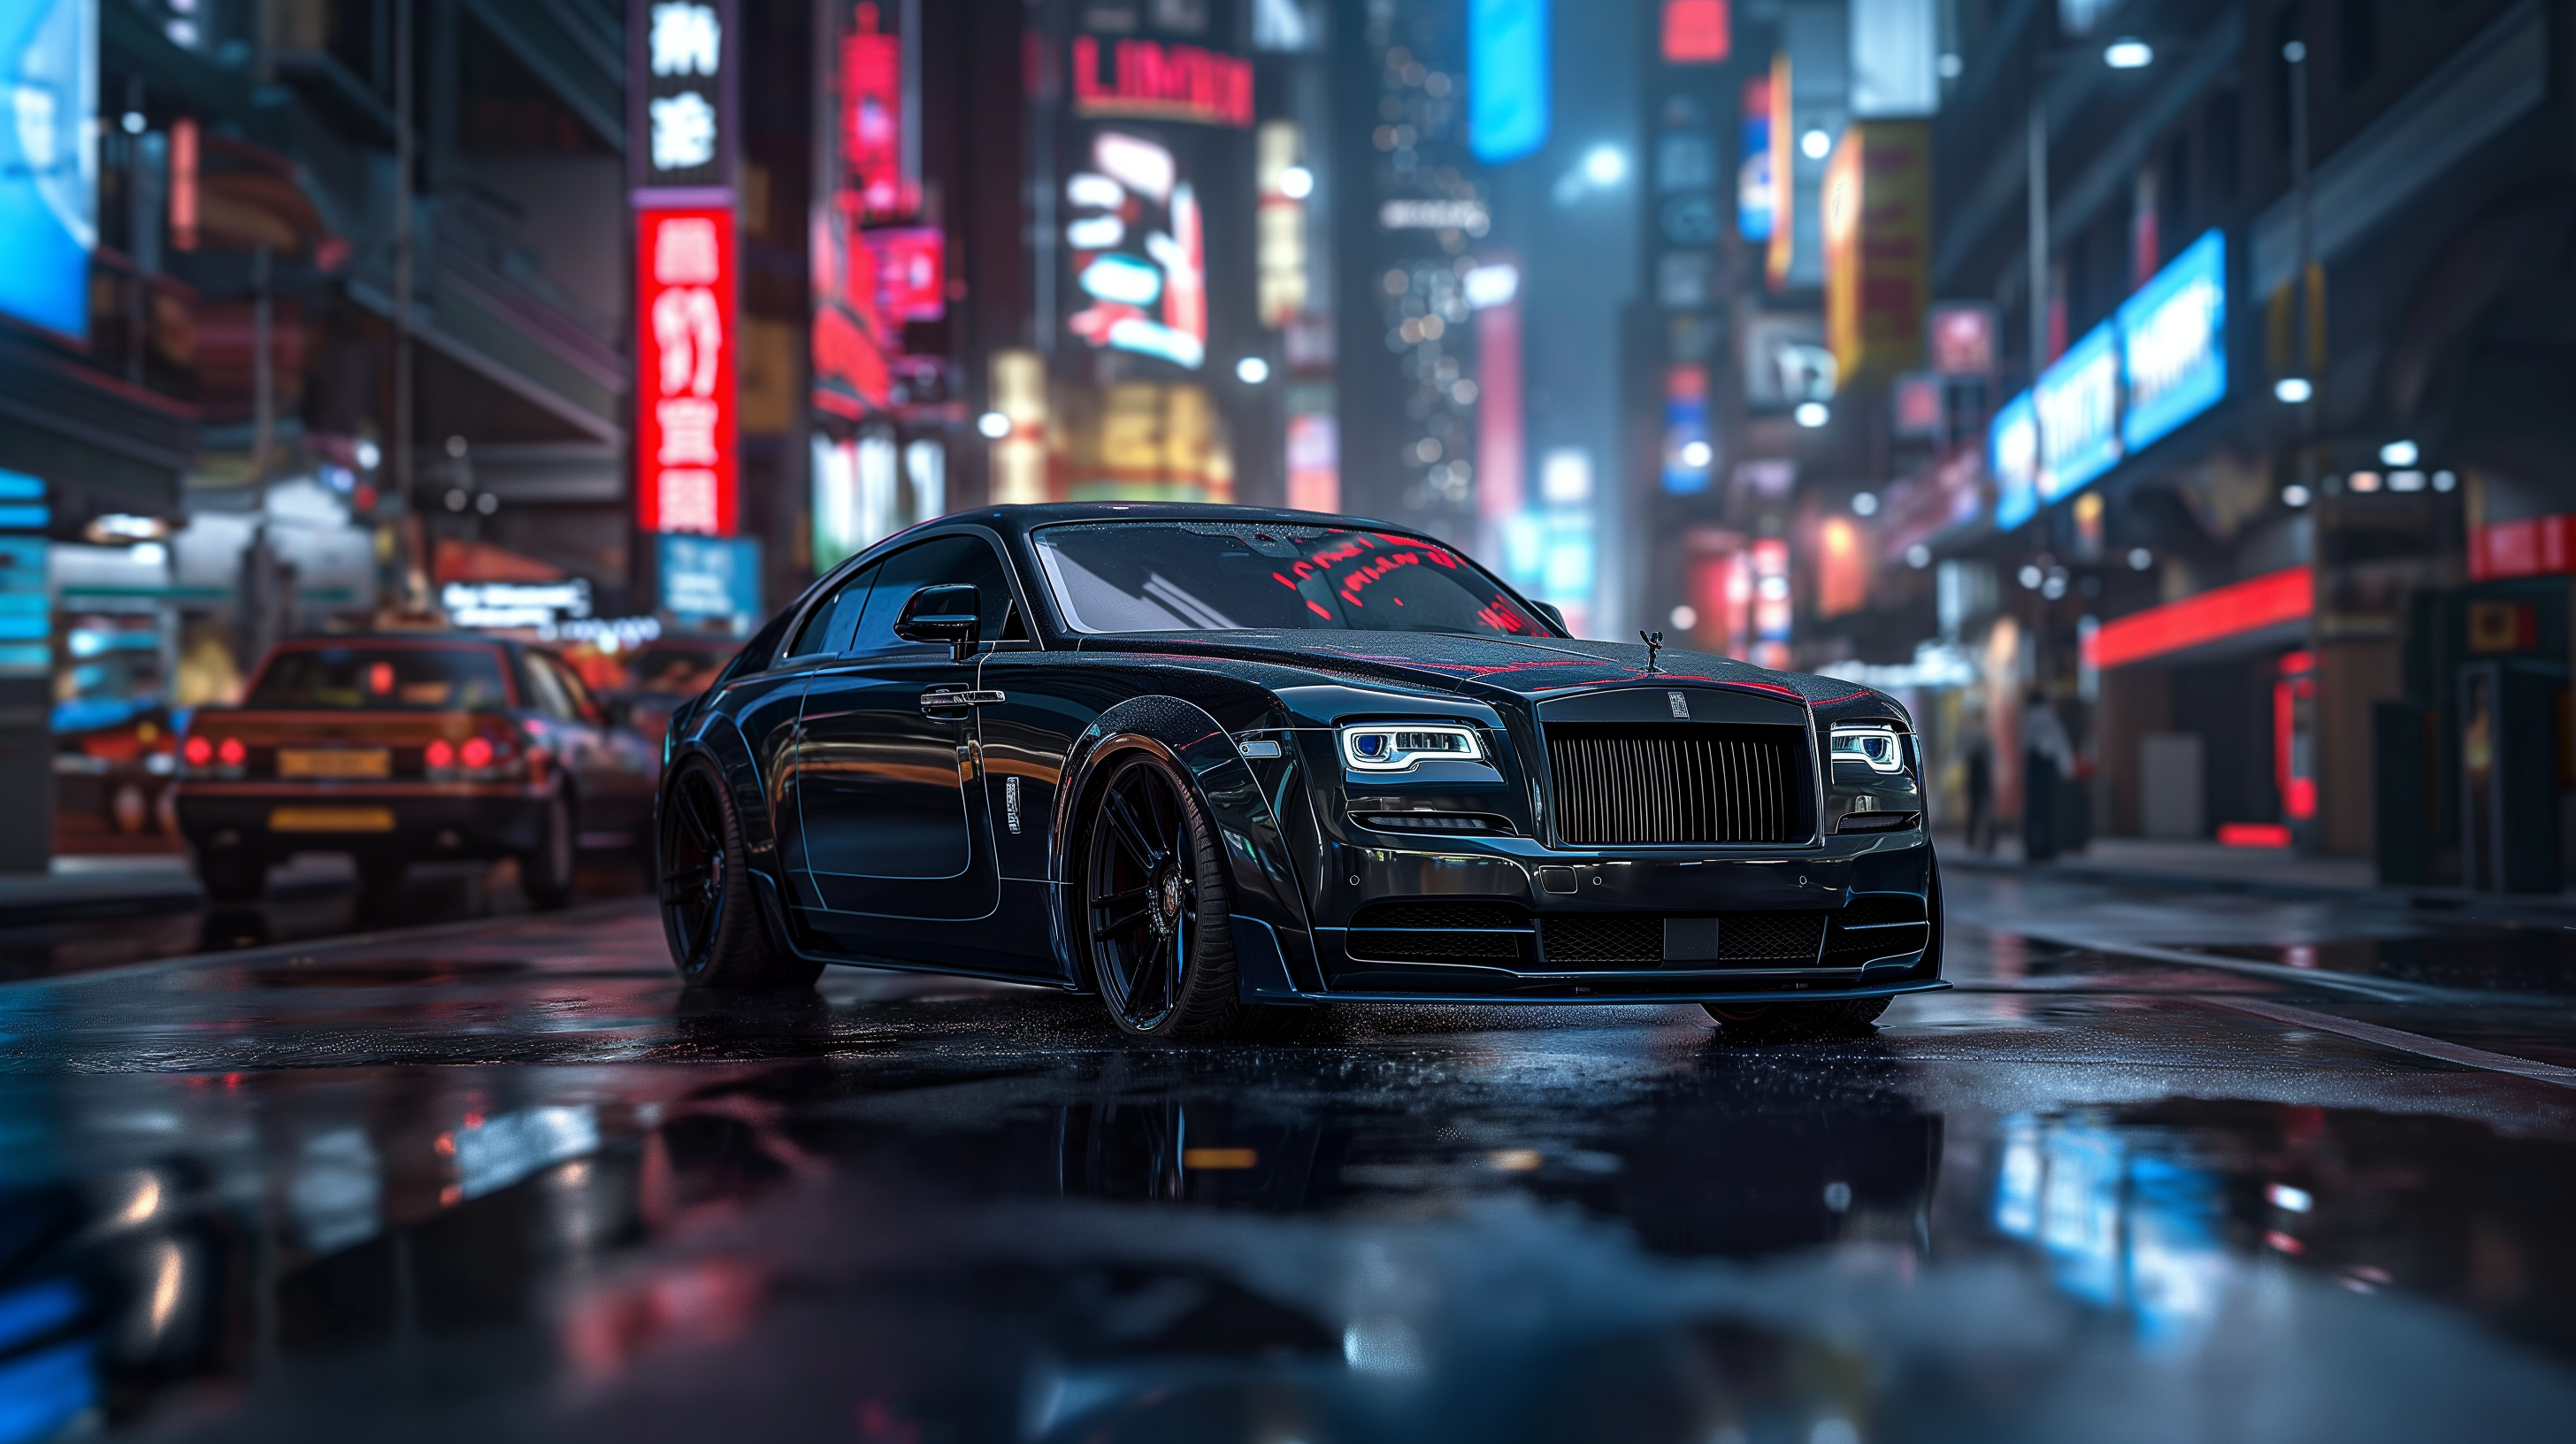 General 2912x1632 car Rolls Royce Wraith AI art cyberpunk frontal view headlights vehicle depth of field wet signs building city lights reflection taillights wet road